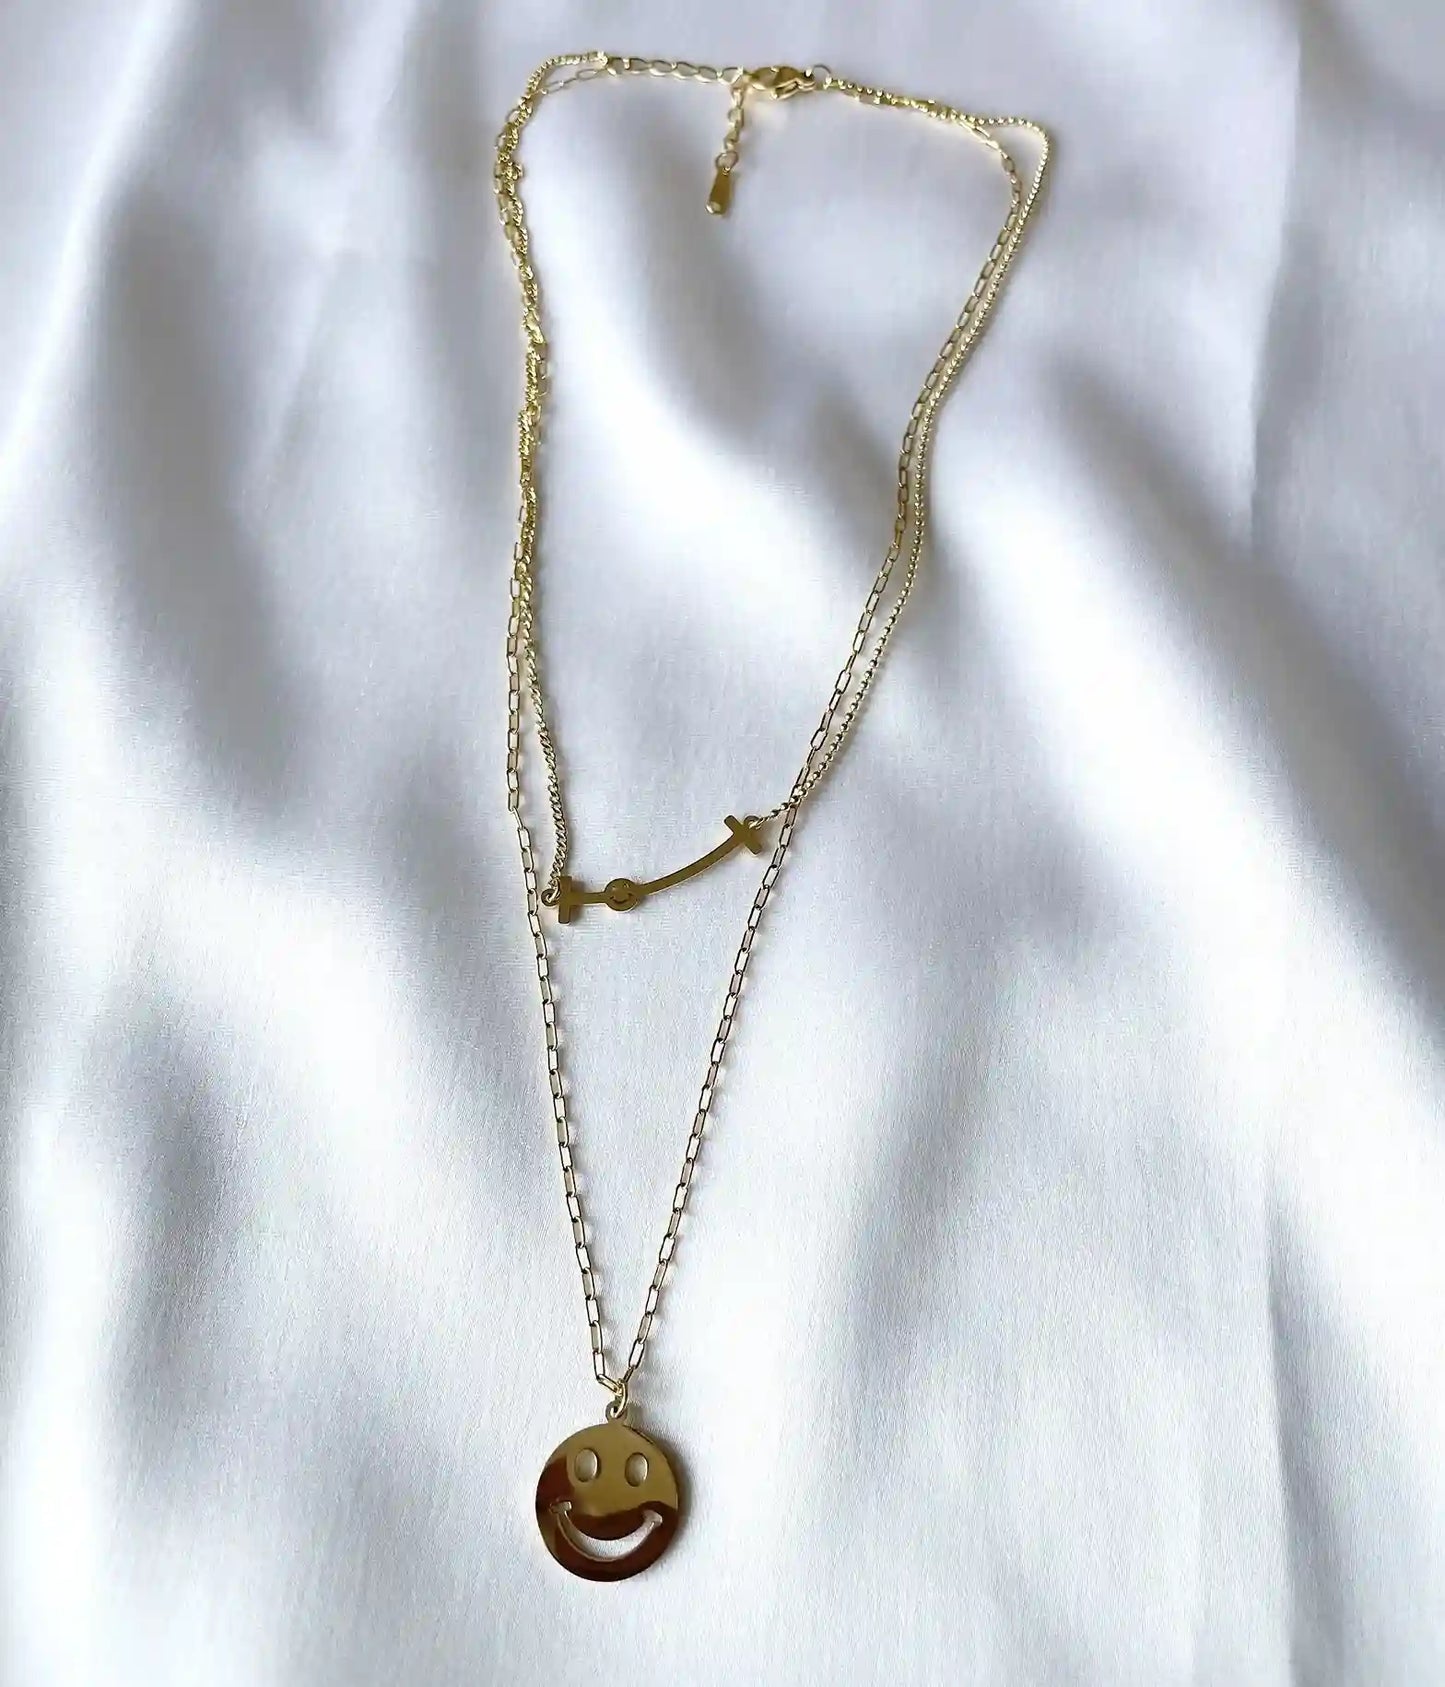 Gold Plated Smile Face Chain Necklace